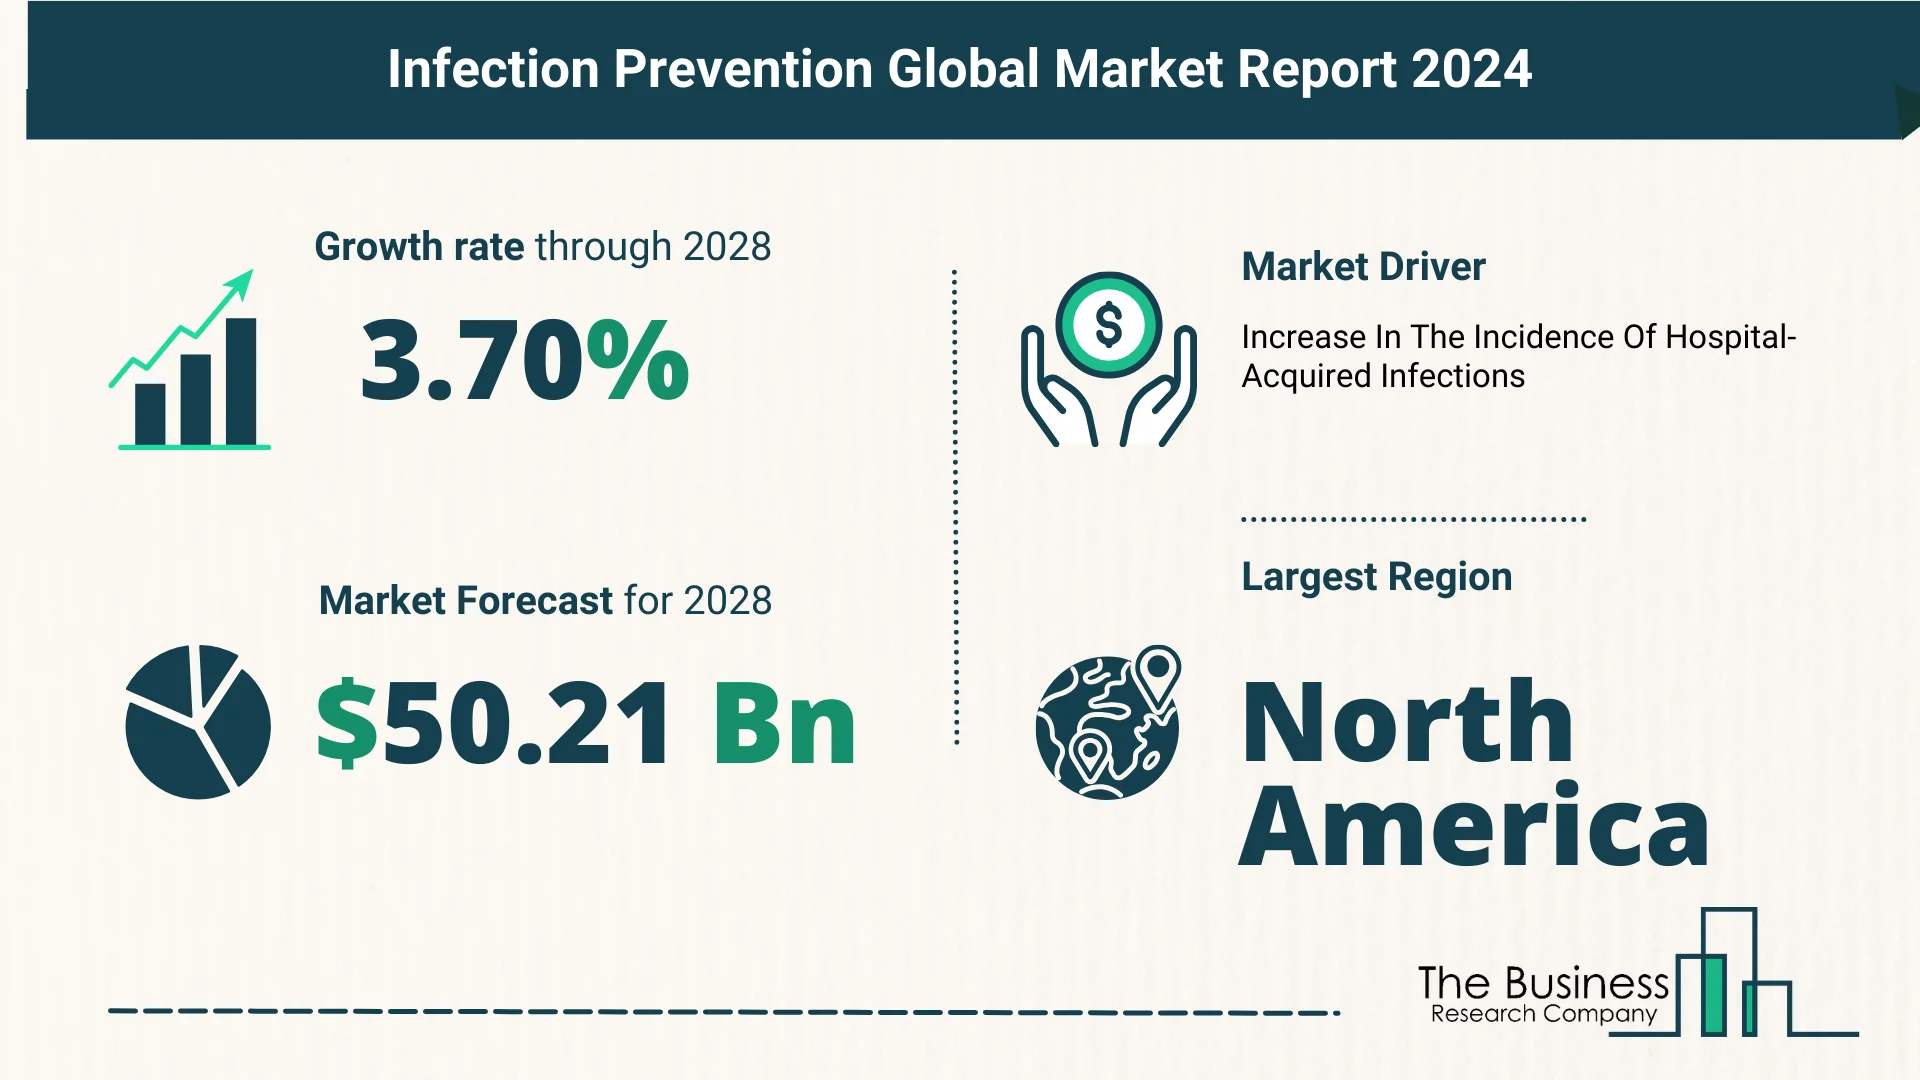 Global Infection Prevention Market Analysis: Estimated Market Size And Growth Rate